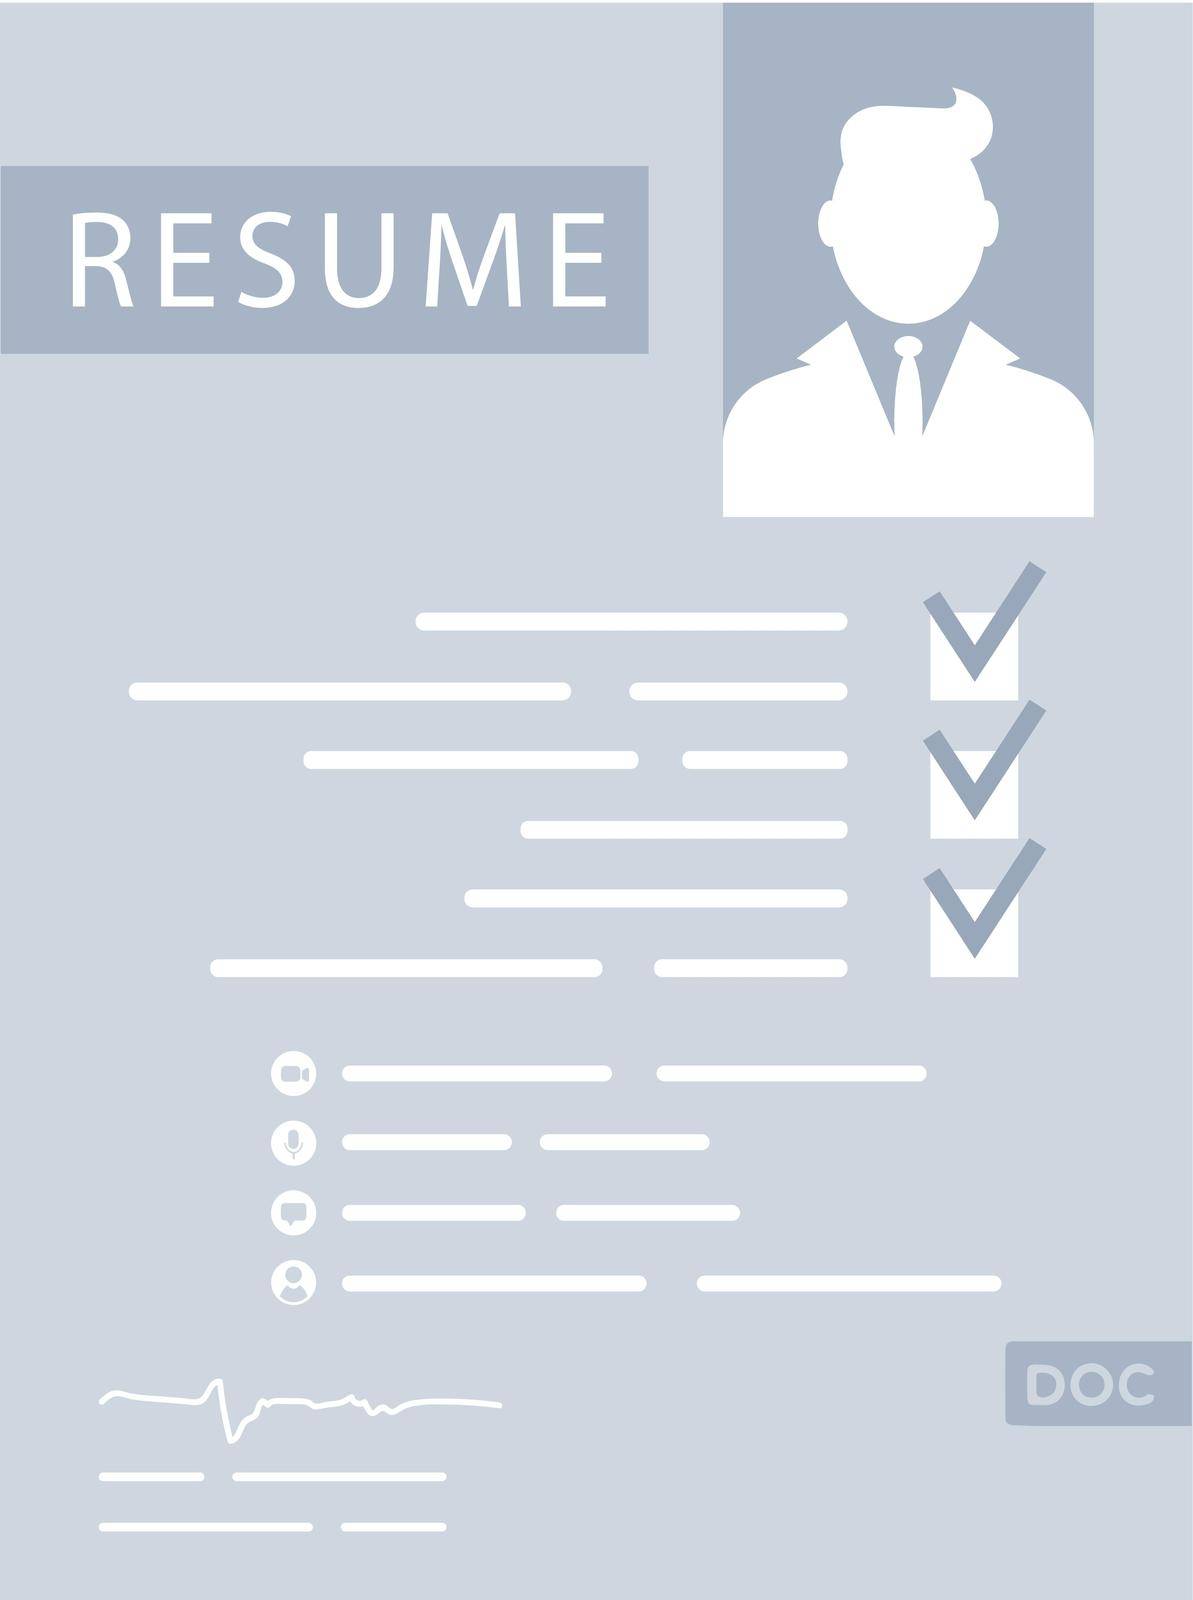 Resume icon. The concept of getting a job. Isolated. Vector.